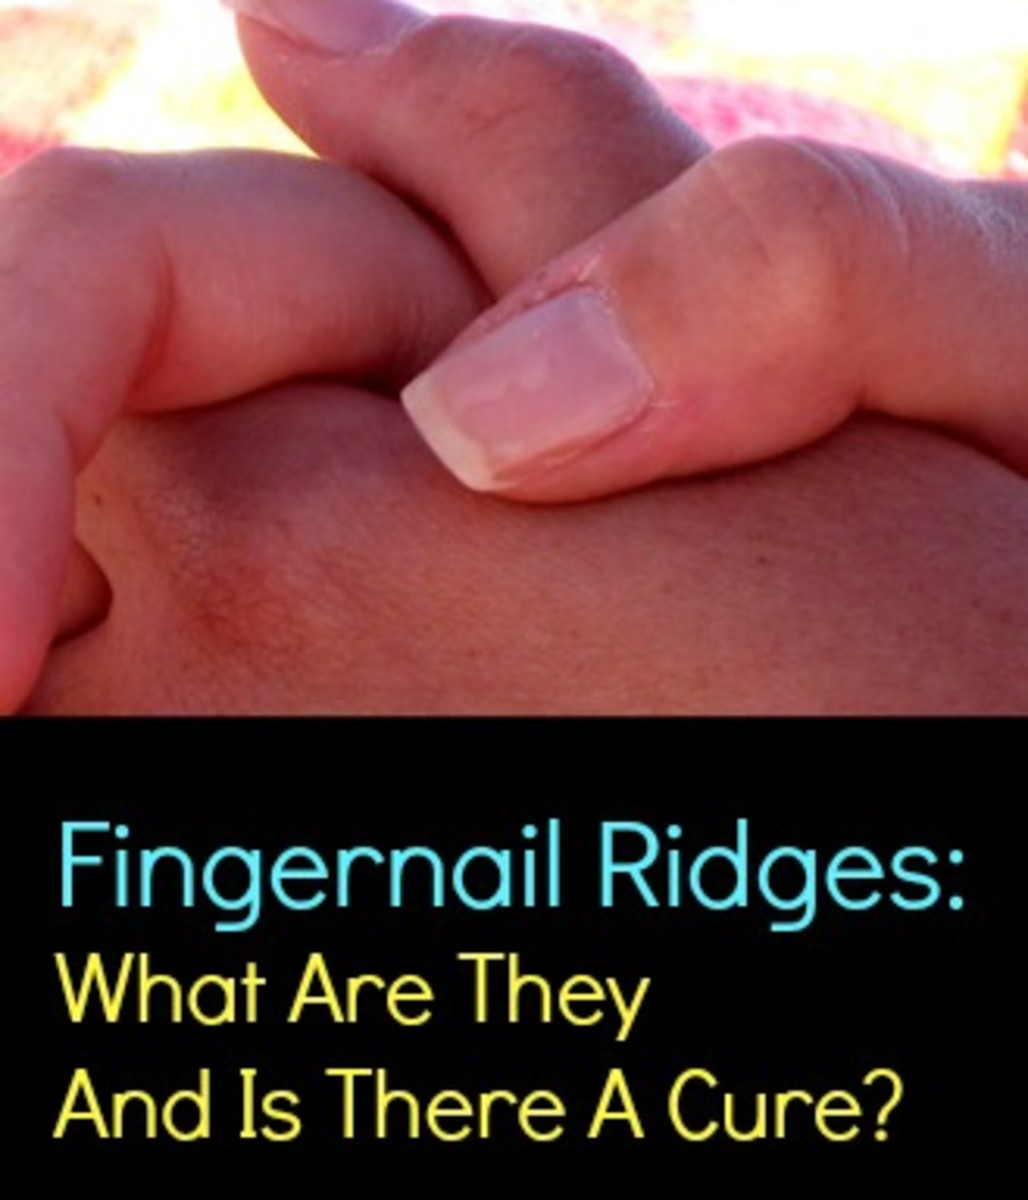 fingernail-ridges-what-are-the-symptoms-and-is-there-a-cure